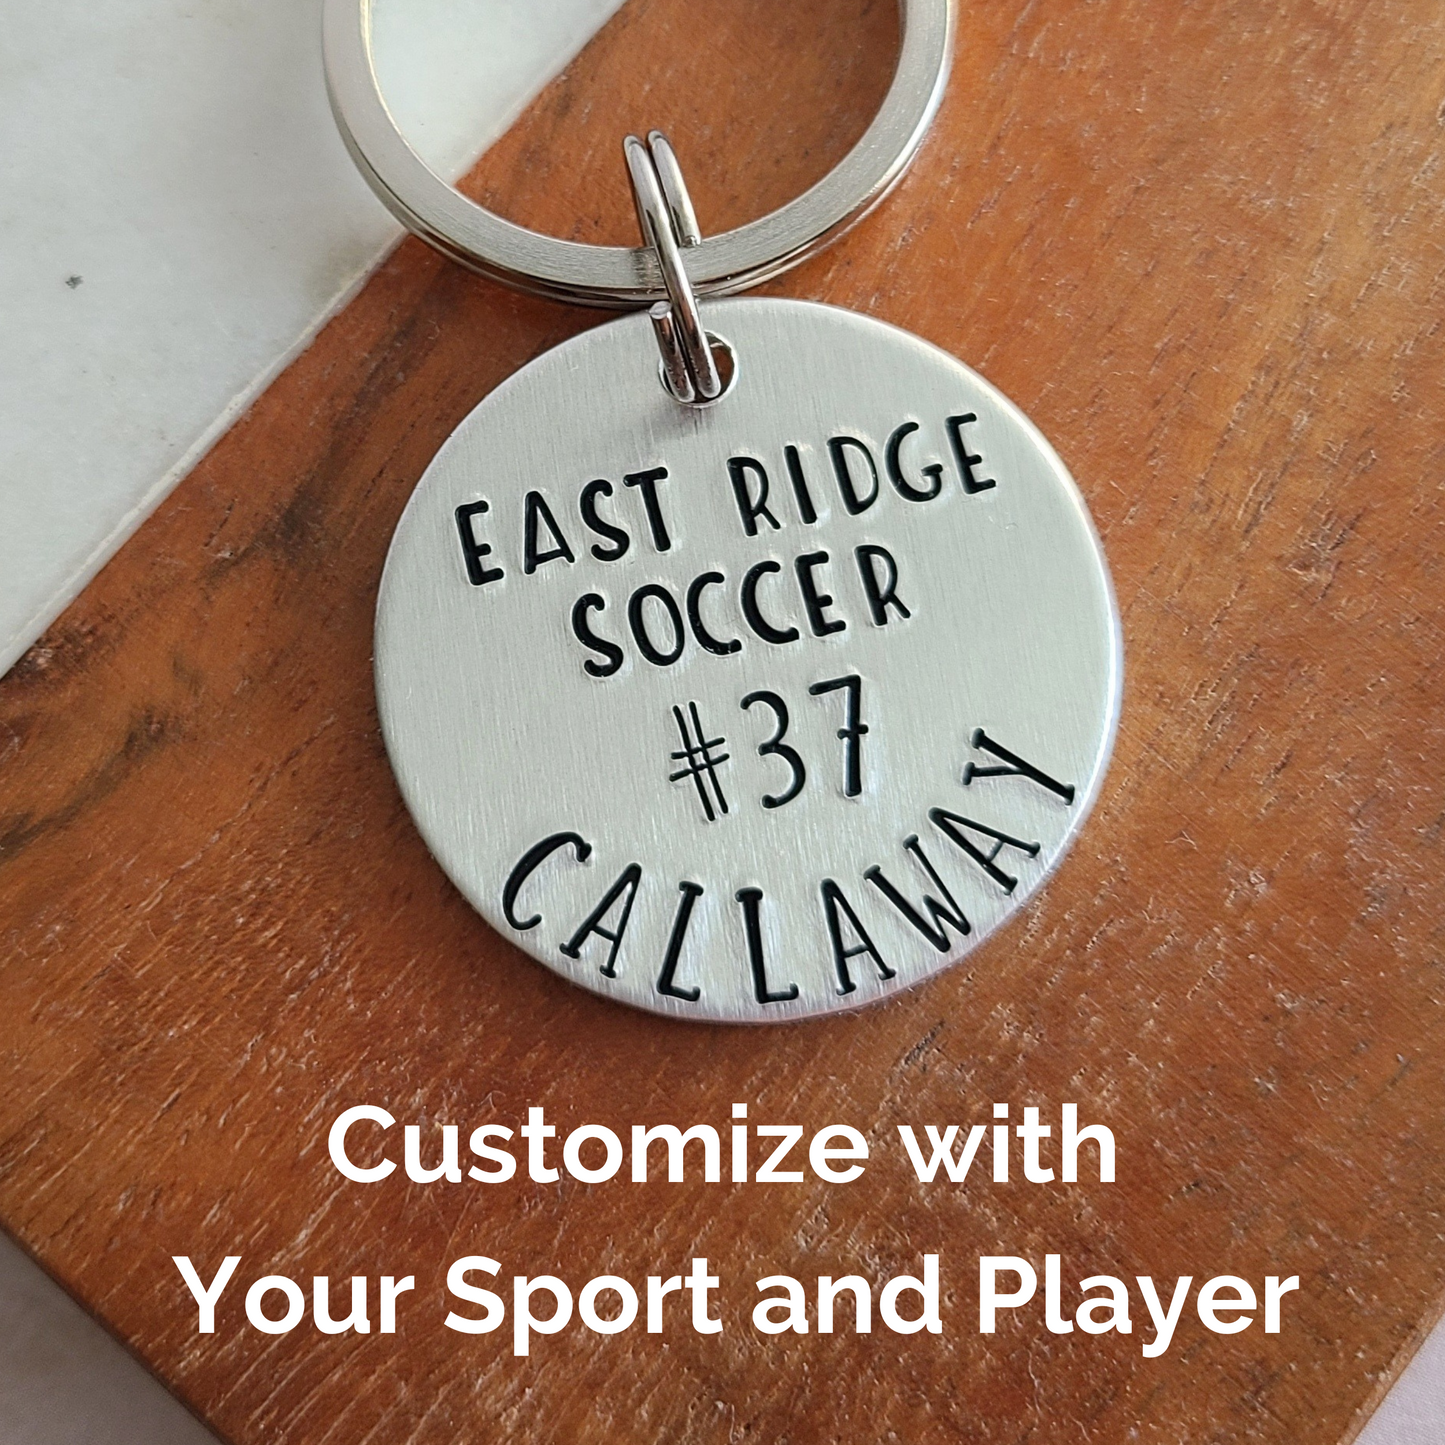 Personalized Name Tags For Bags, Backpacks, Sports Teams, Gifts